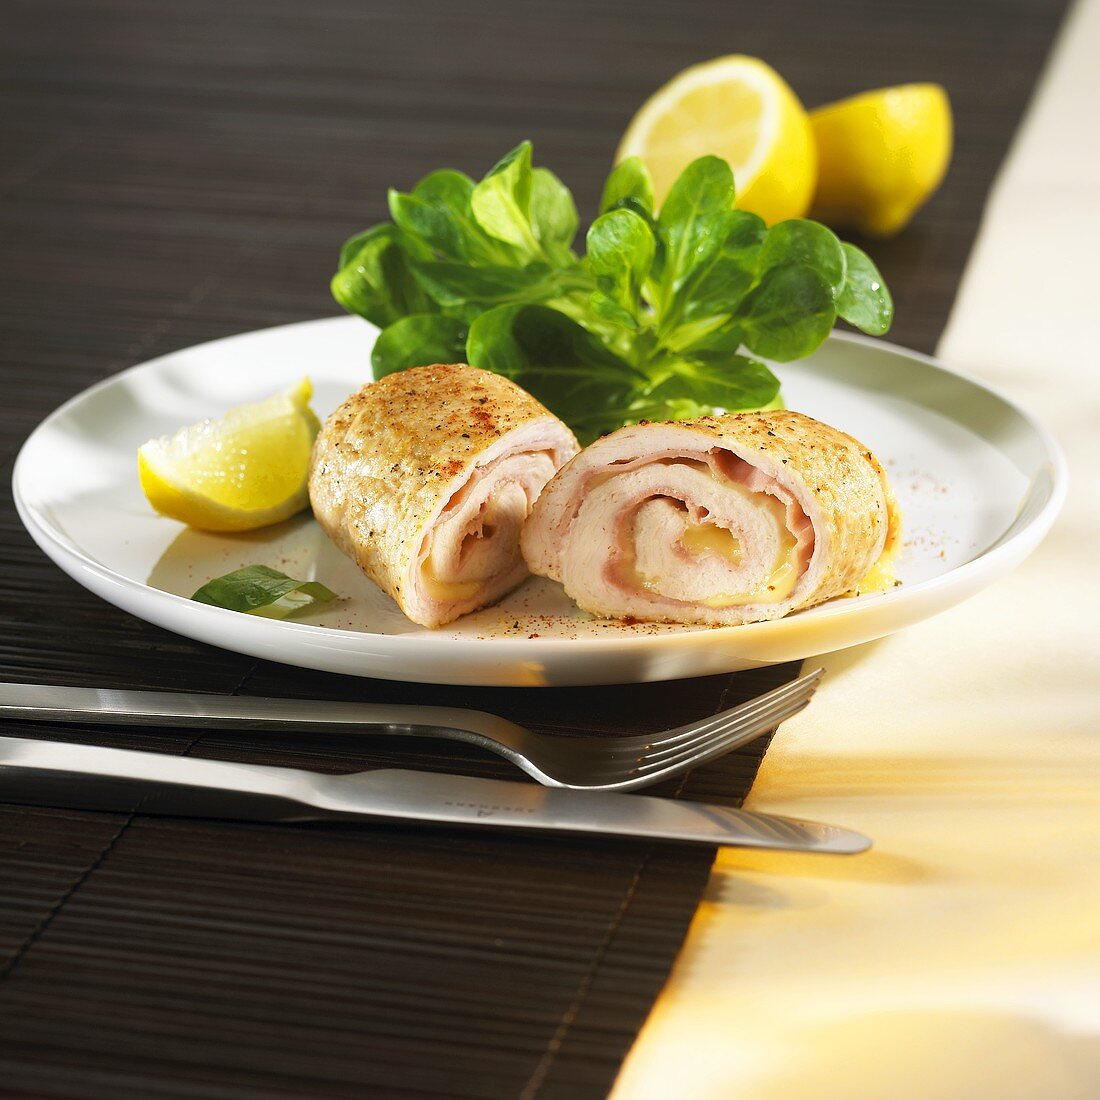 Turkey rolls with ham and cheese